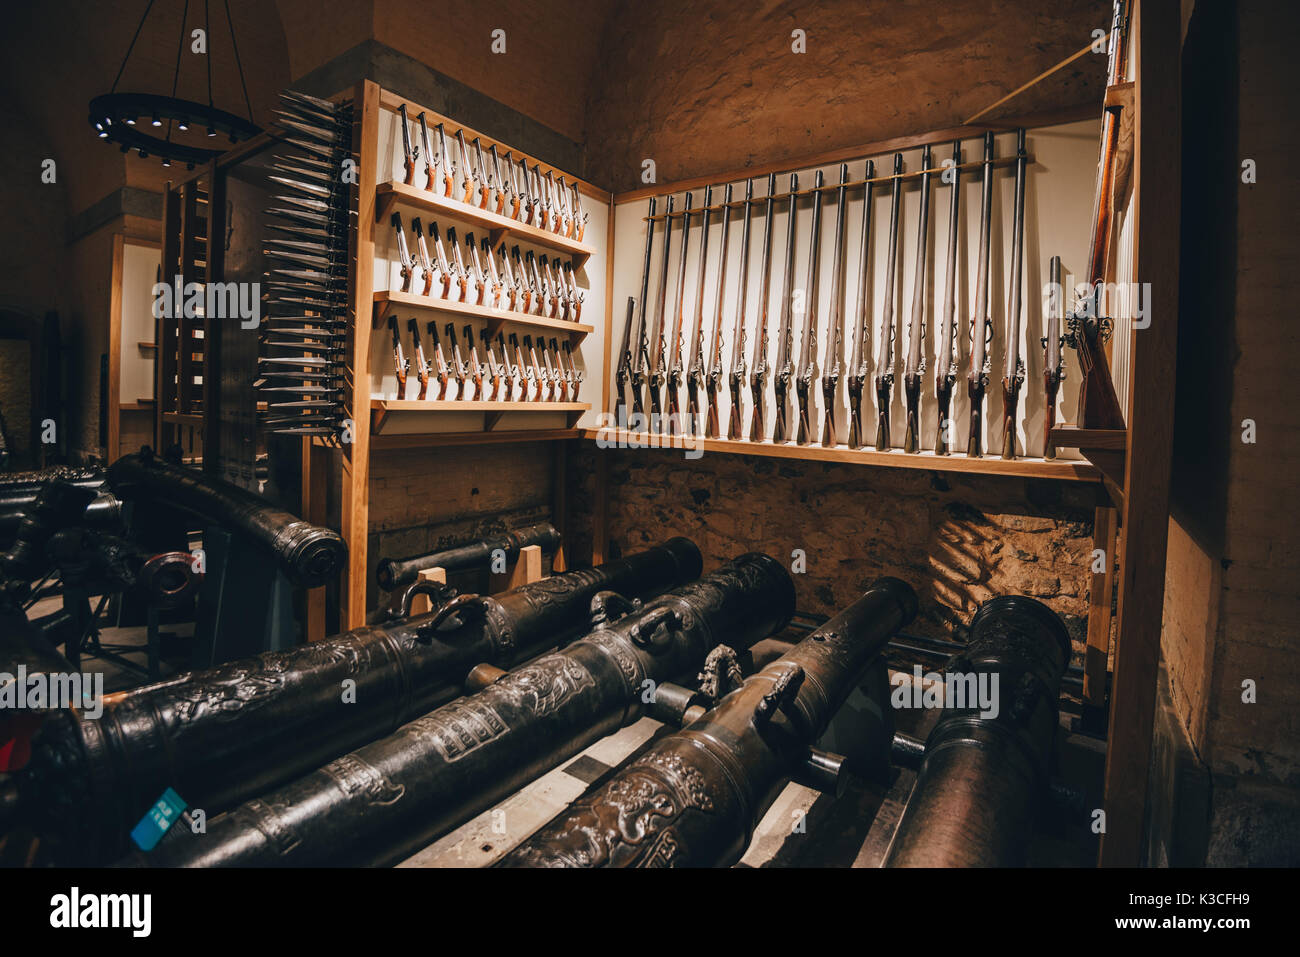 The armoury at the tower of London Stock Photo